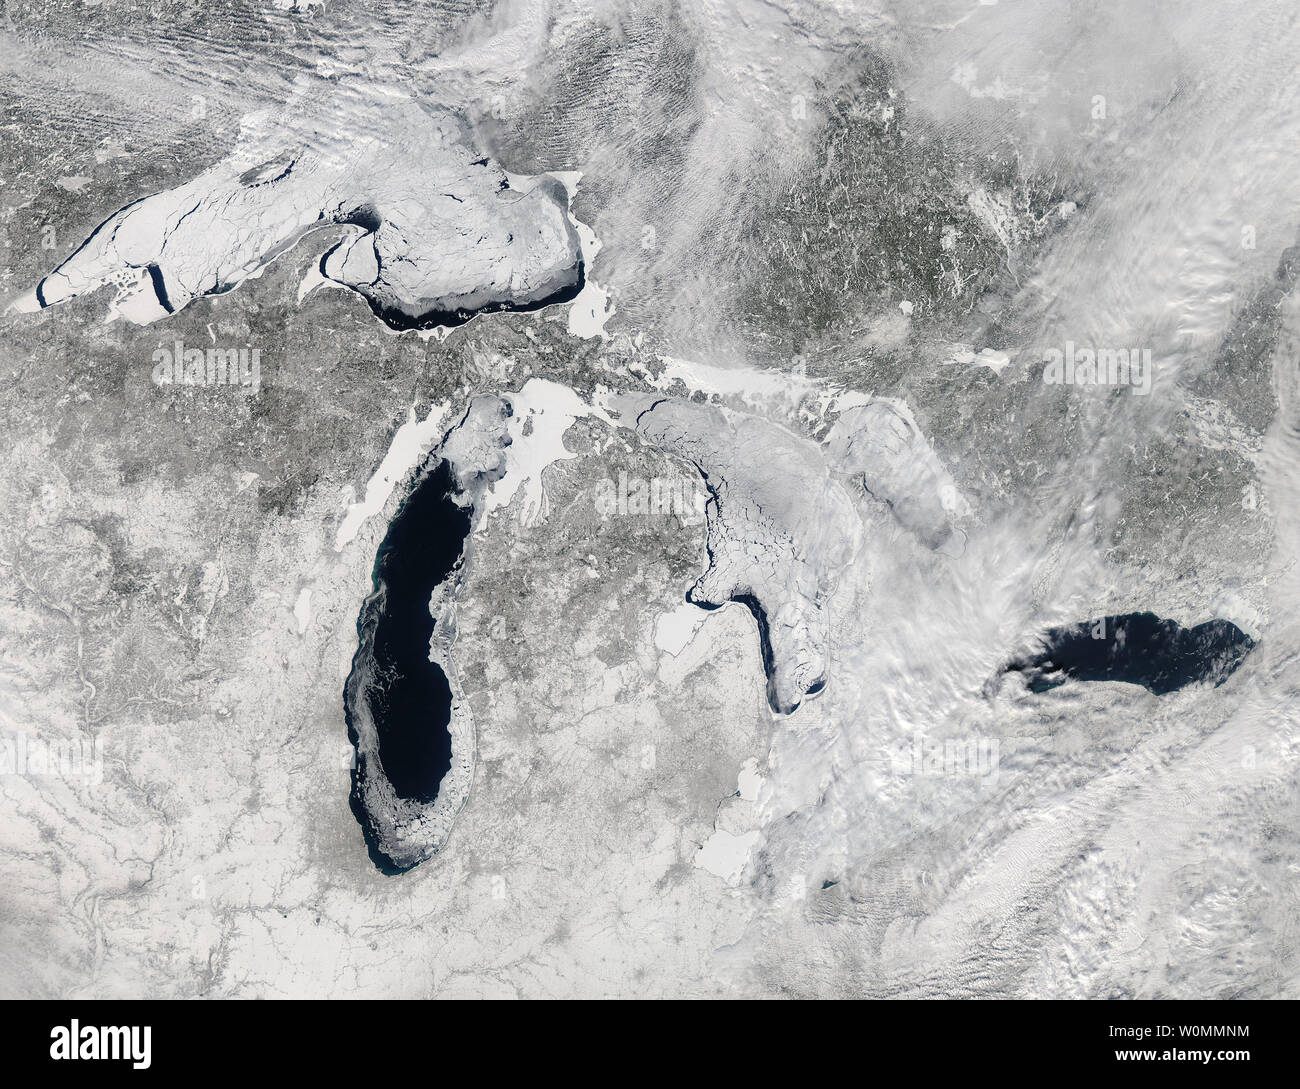 This NASA image taken on February 19, 2014 by the the Moderate Resolution Imaging Spectroradiometer (MODIS) aboard NASA’s Aqua satellite shows the Great Lakes 80% frozen over during one of the hardest freeze-ups in four decades. North America’s Great Lakes peaked at 88.42% on February 12-13 – a percentage not recorded since 1994. The ice extent has surpassed 80% just five times in four decades. The average maximum ice extent since 1973 is just over 50%. UPI/NASA Stock Photo